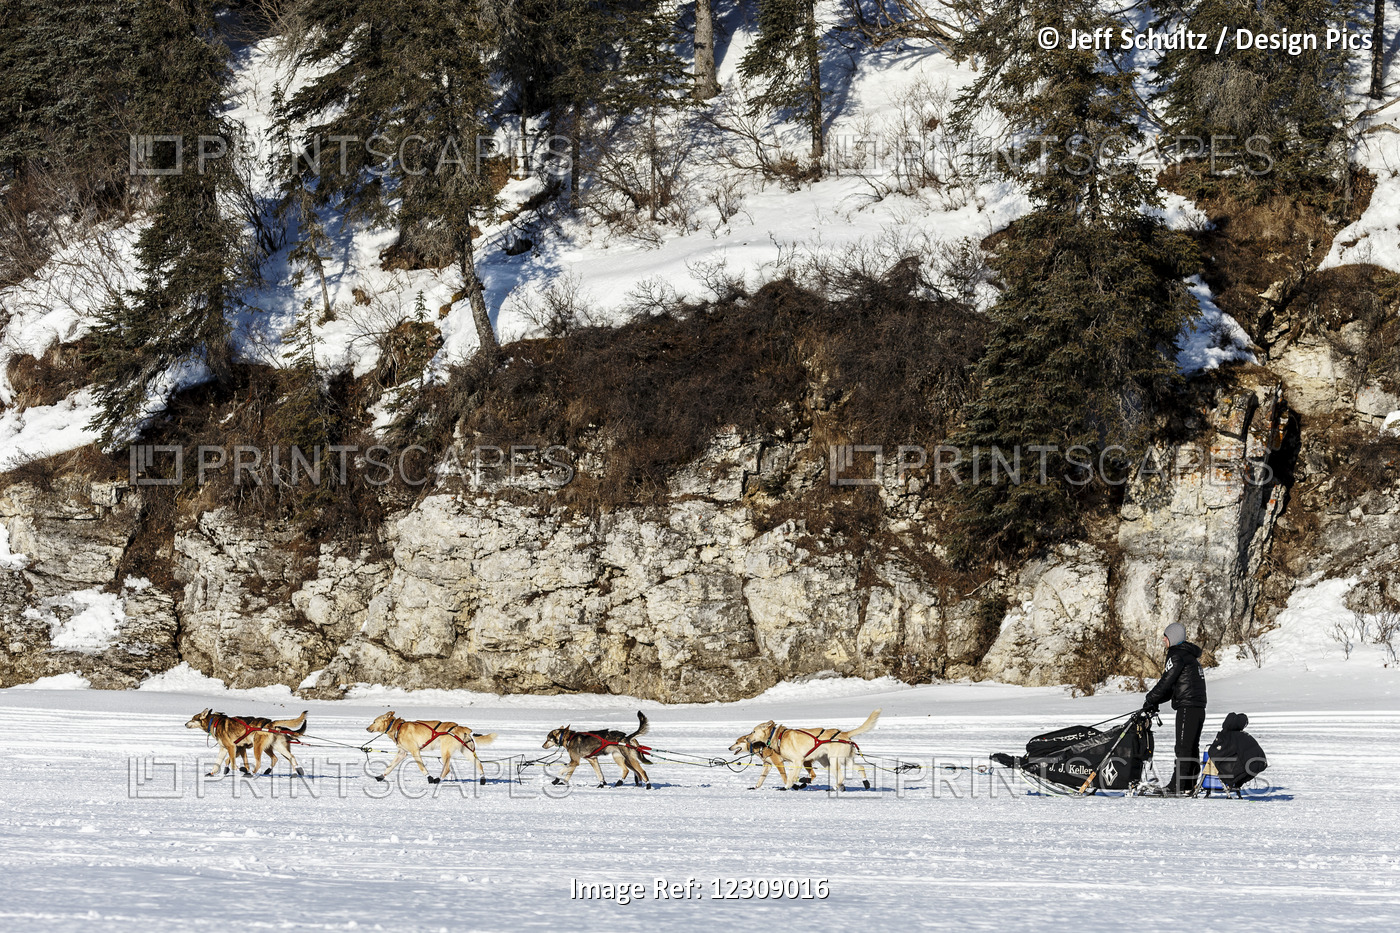 Dallas Seavey Leaving The White Mountain Checkpoint During The 2016 Iditarod, ...